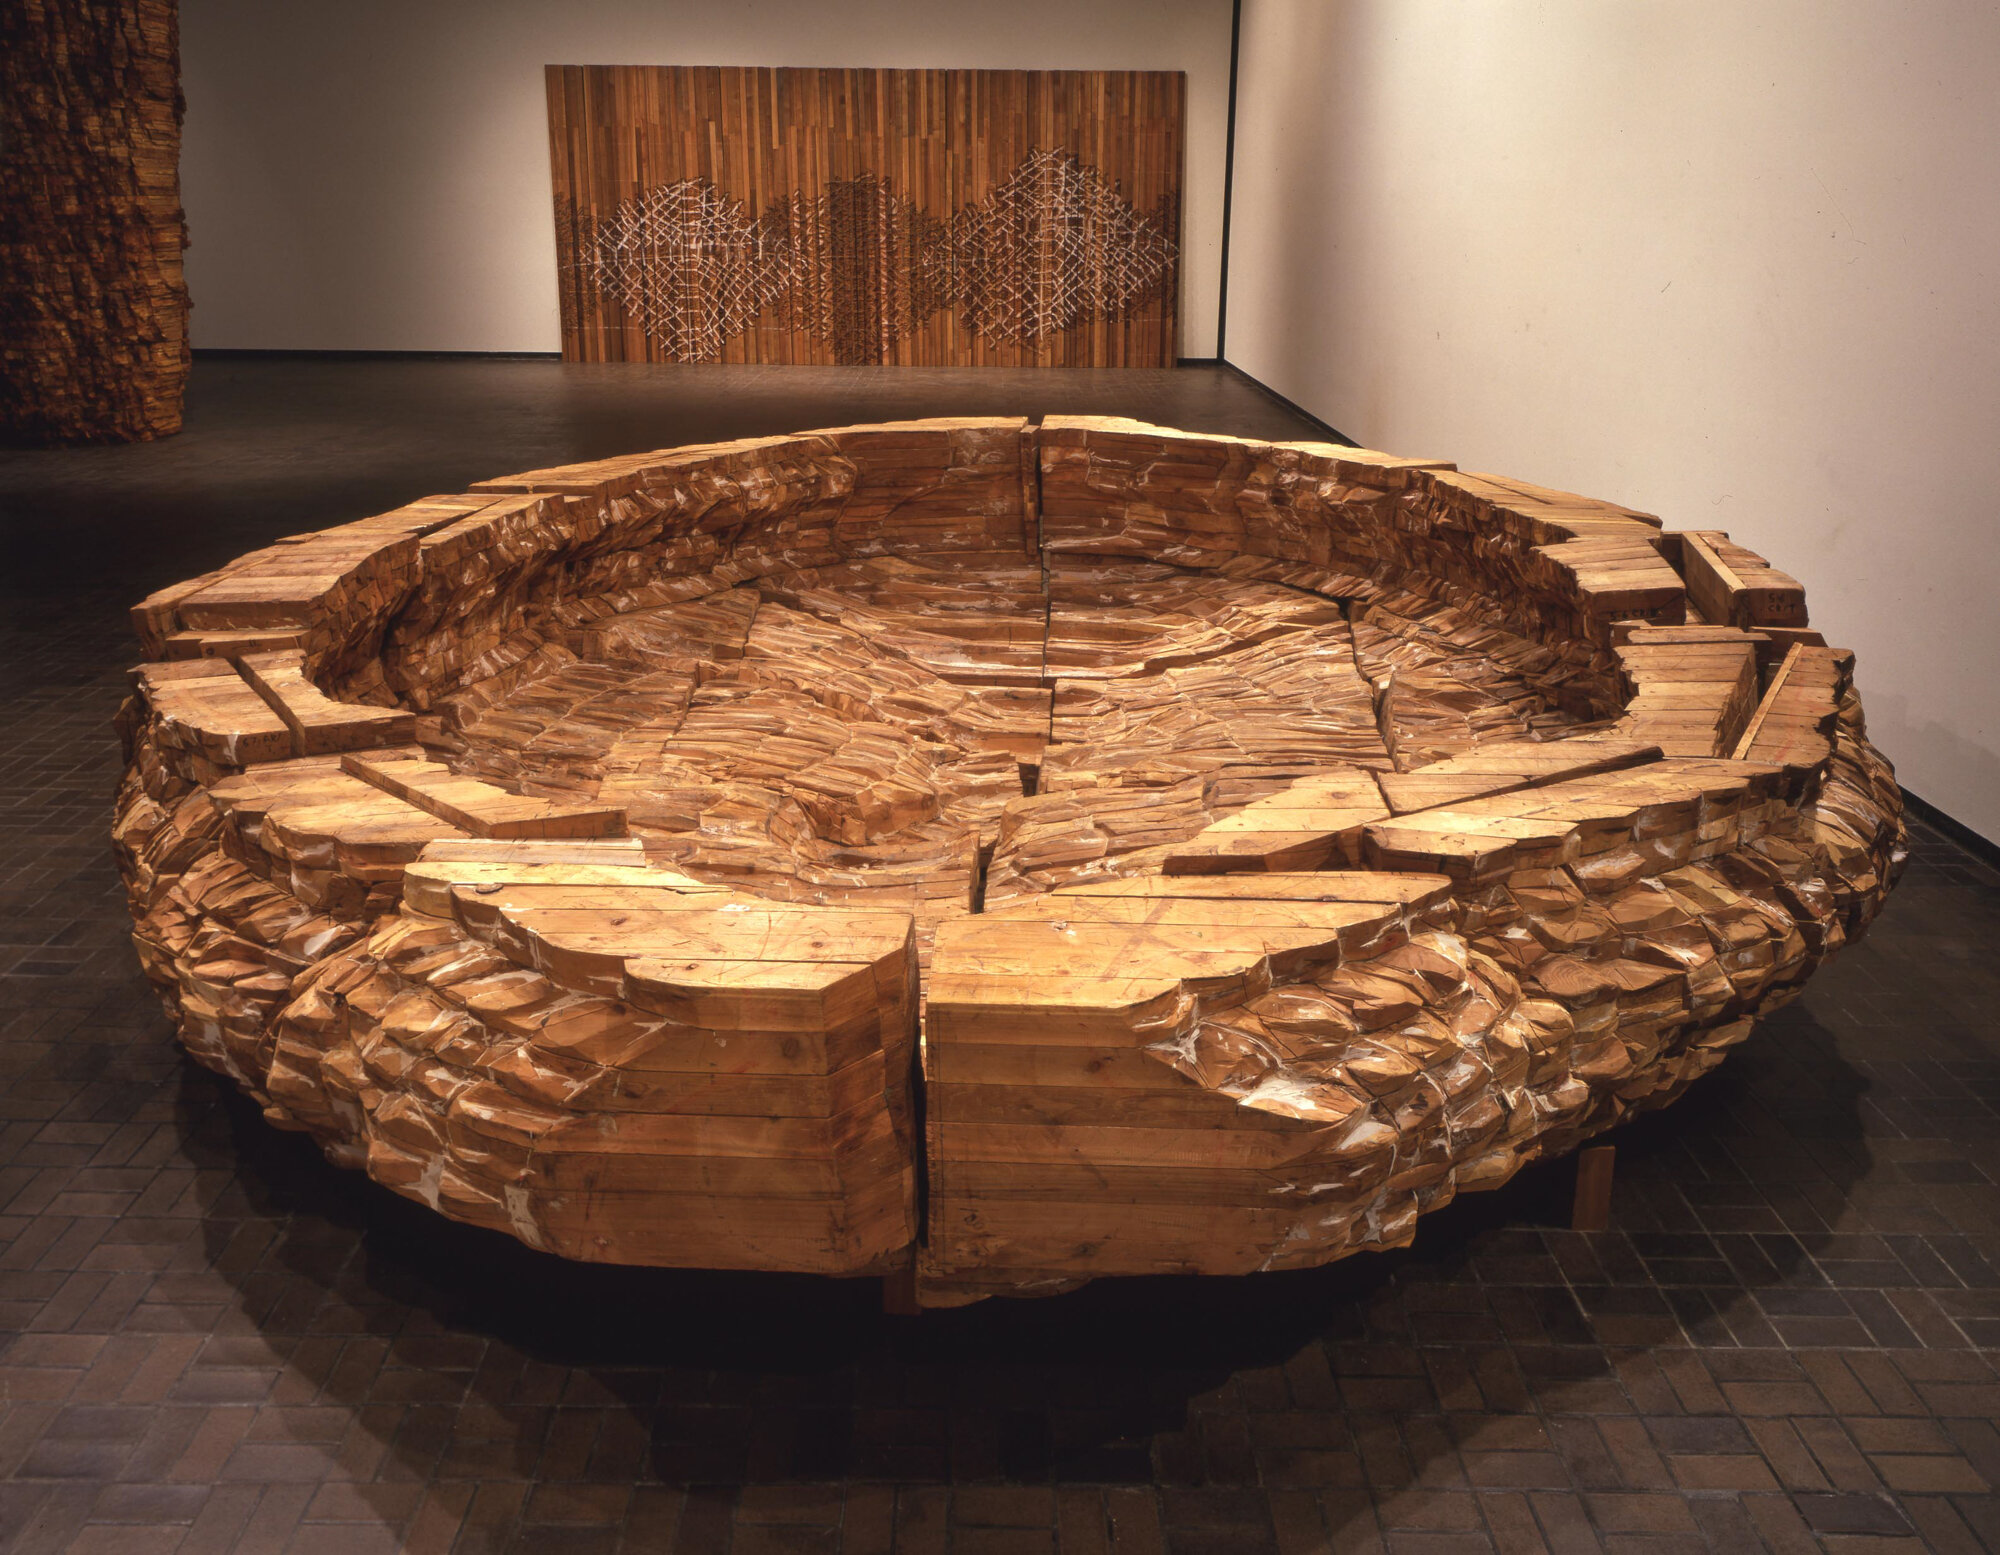       Can't Eat Black , 2001-2002 Cedar and bondo 56 x 216 x 212 in.    MORE IMAGES   Neuberger Museum of Art  